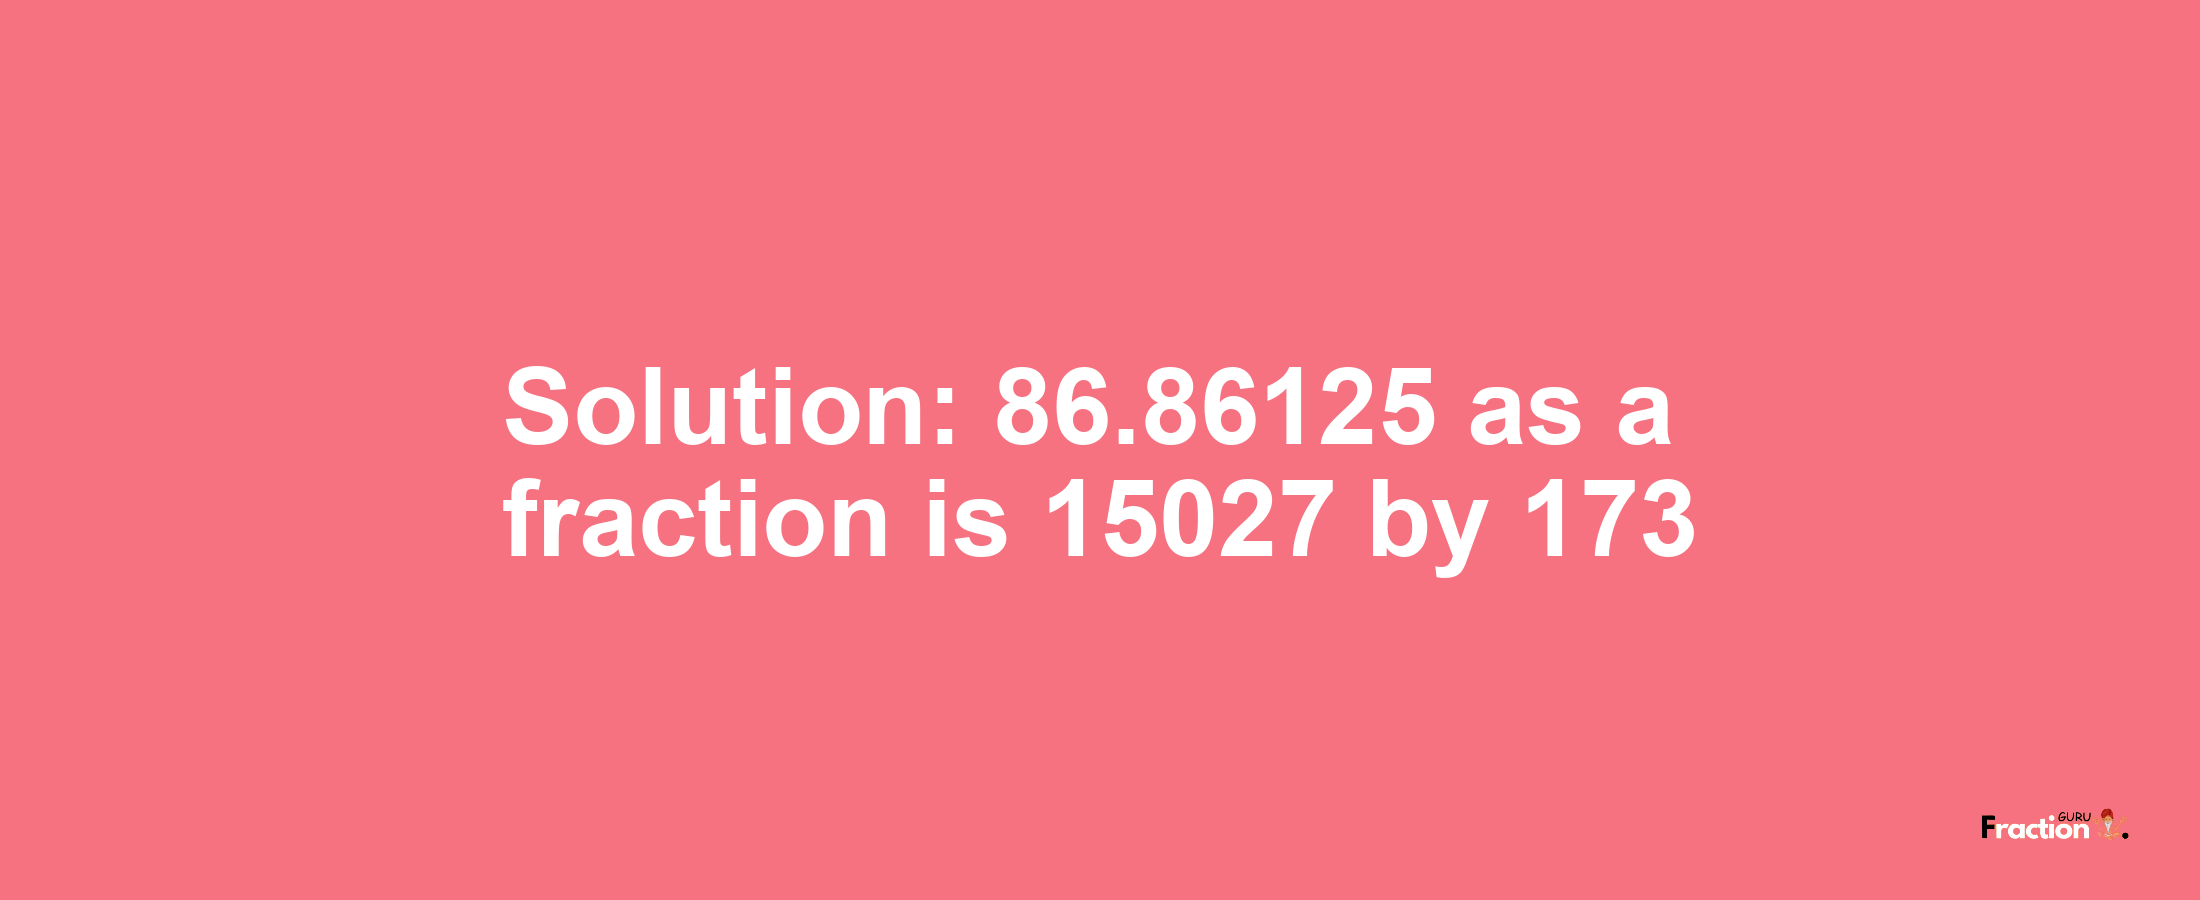 Solution:86.86125 as a fraction is 15027/173